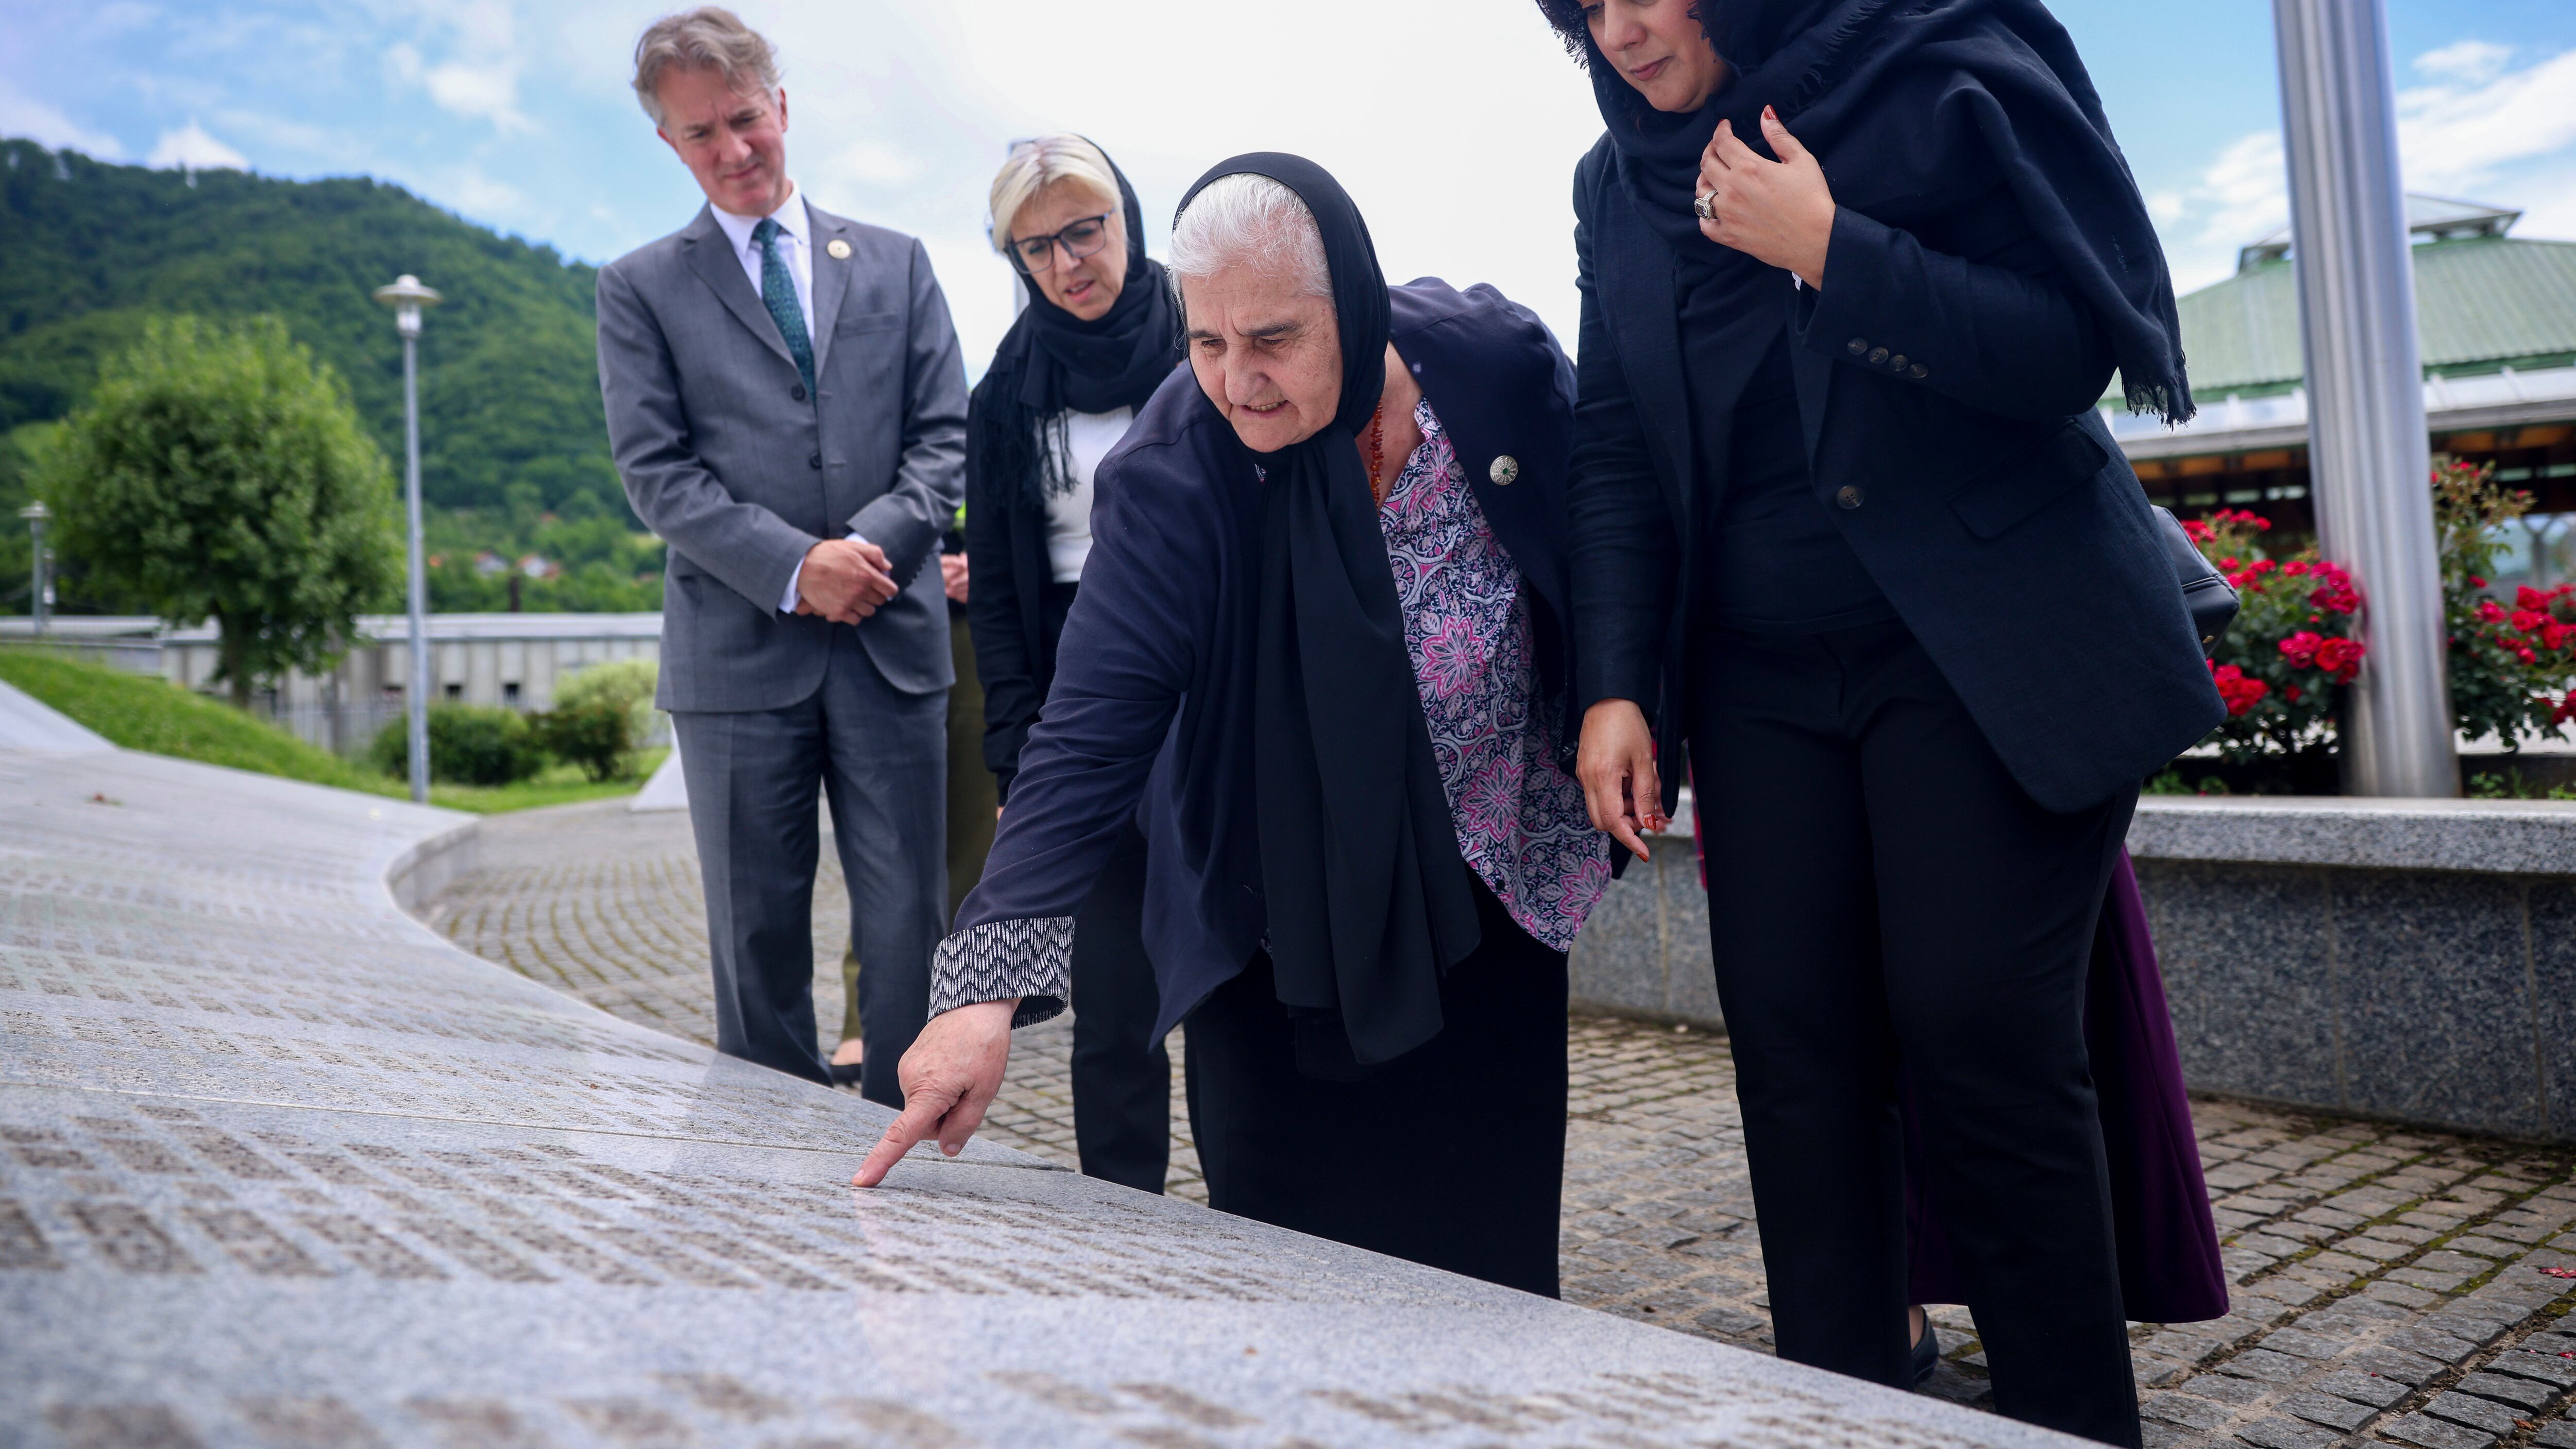 UK Minister of State (Minister for Europe) Nusrat Ghani, right, walks with Munira Subasic, president of the association Mother of Srebrenica, centre, next to the momument with the names of Srebrenica genocide victims, at the Memorial Centre in Potocari, Bosnia (Armin Durgut/AP)